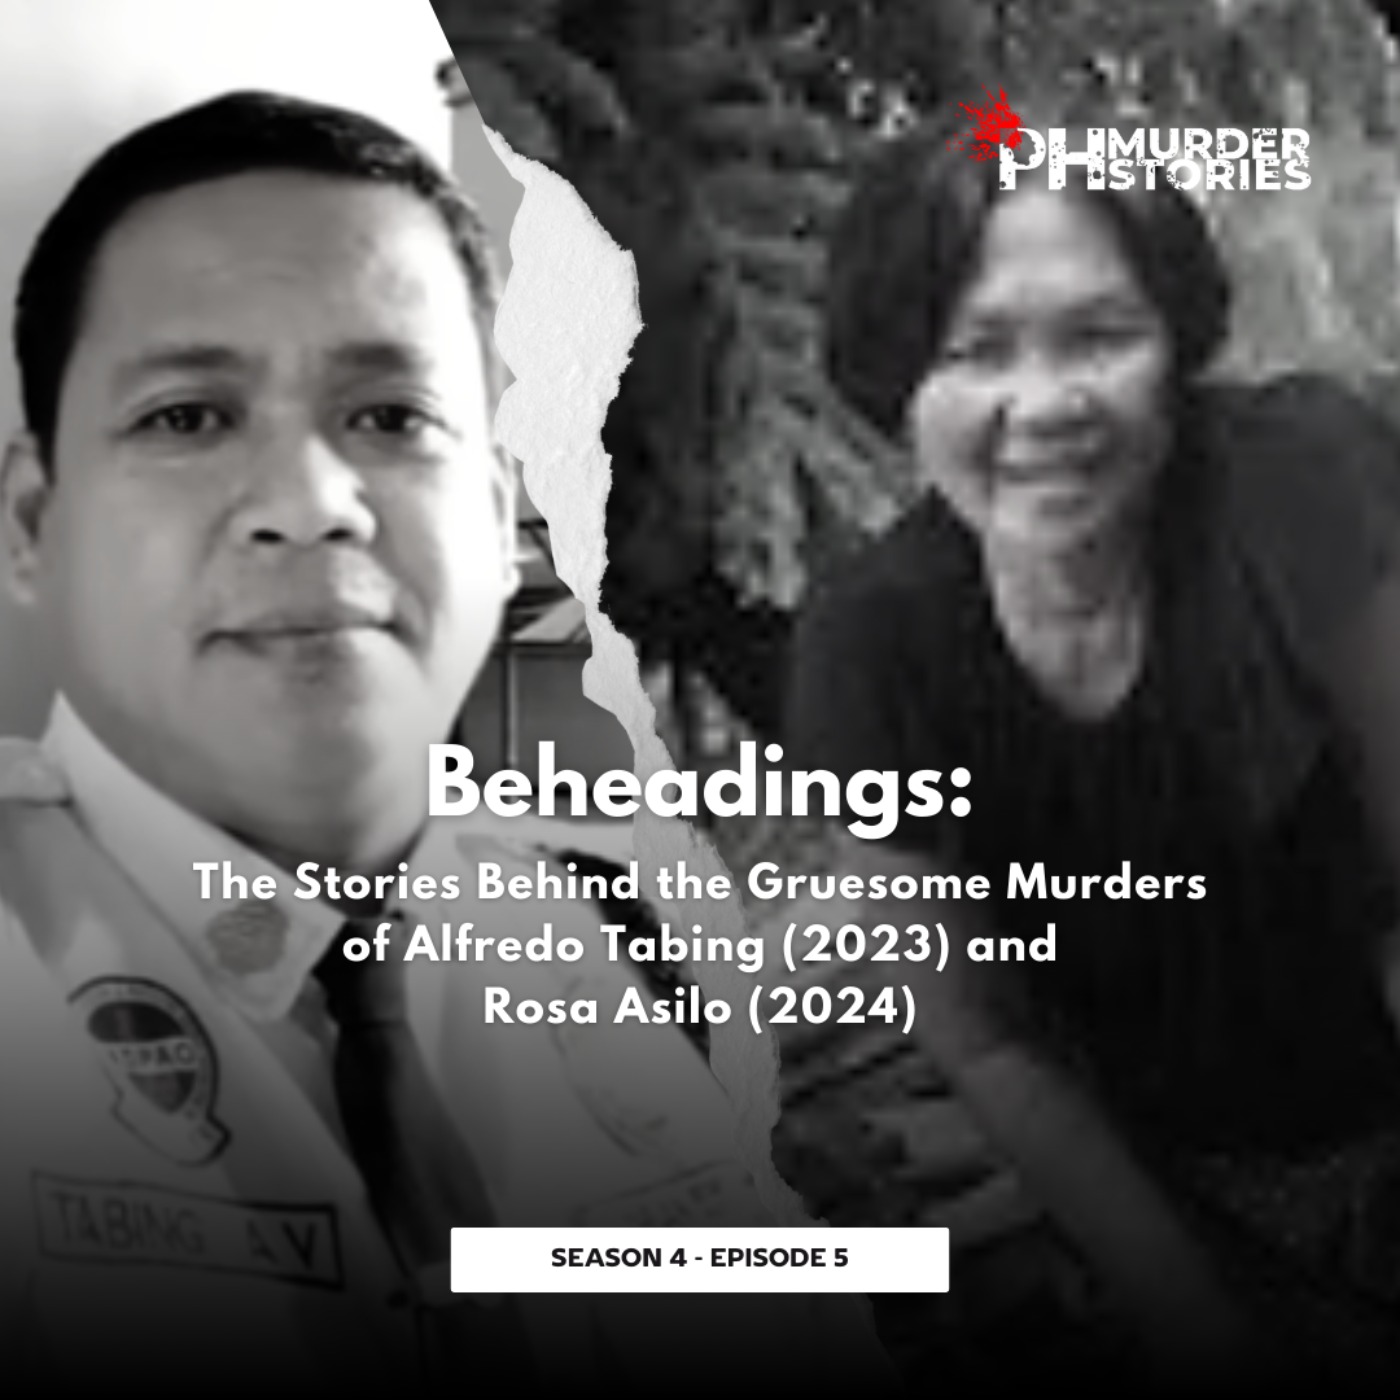 Beheadings: The Stories Behind the Gruesome Murders of Alfredo Tabing (2023) and Rosa Asilo (2024)